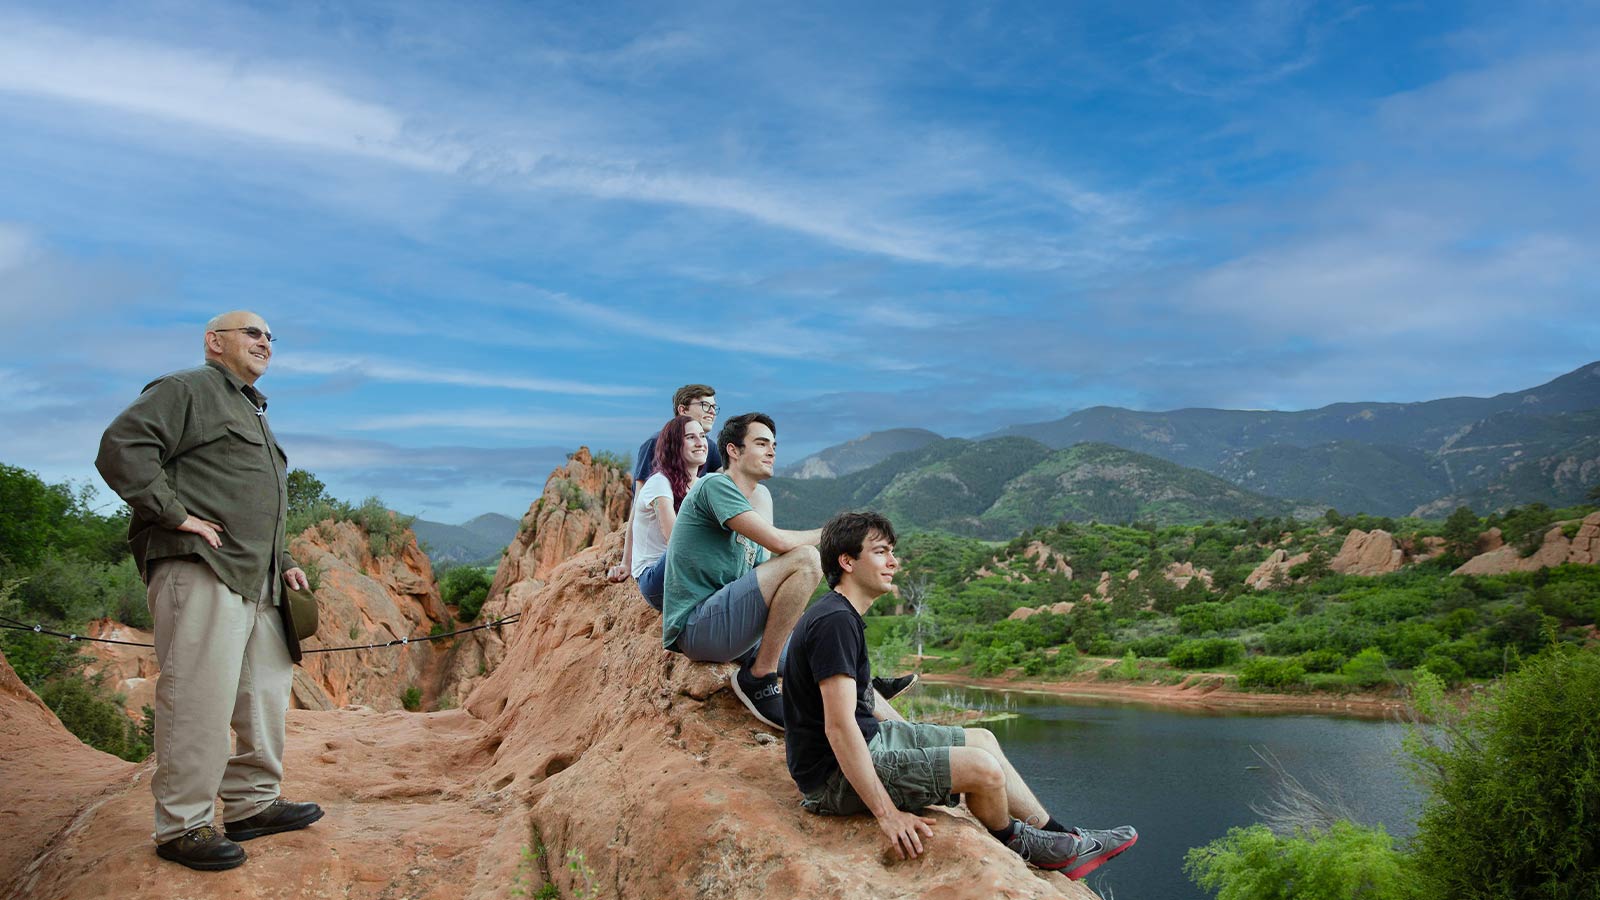 A group of four people sitting and standing on a red rock overlooking a scenic landscape with green hills and a lake.